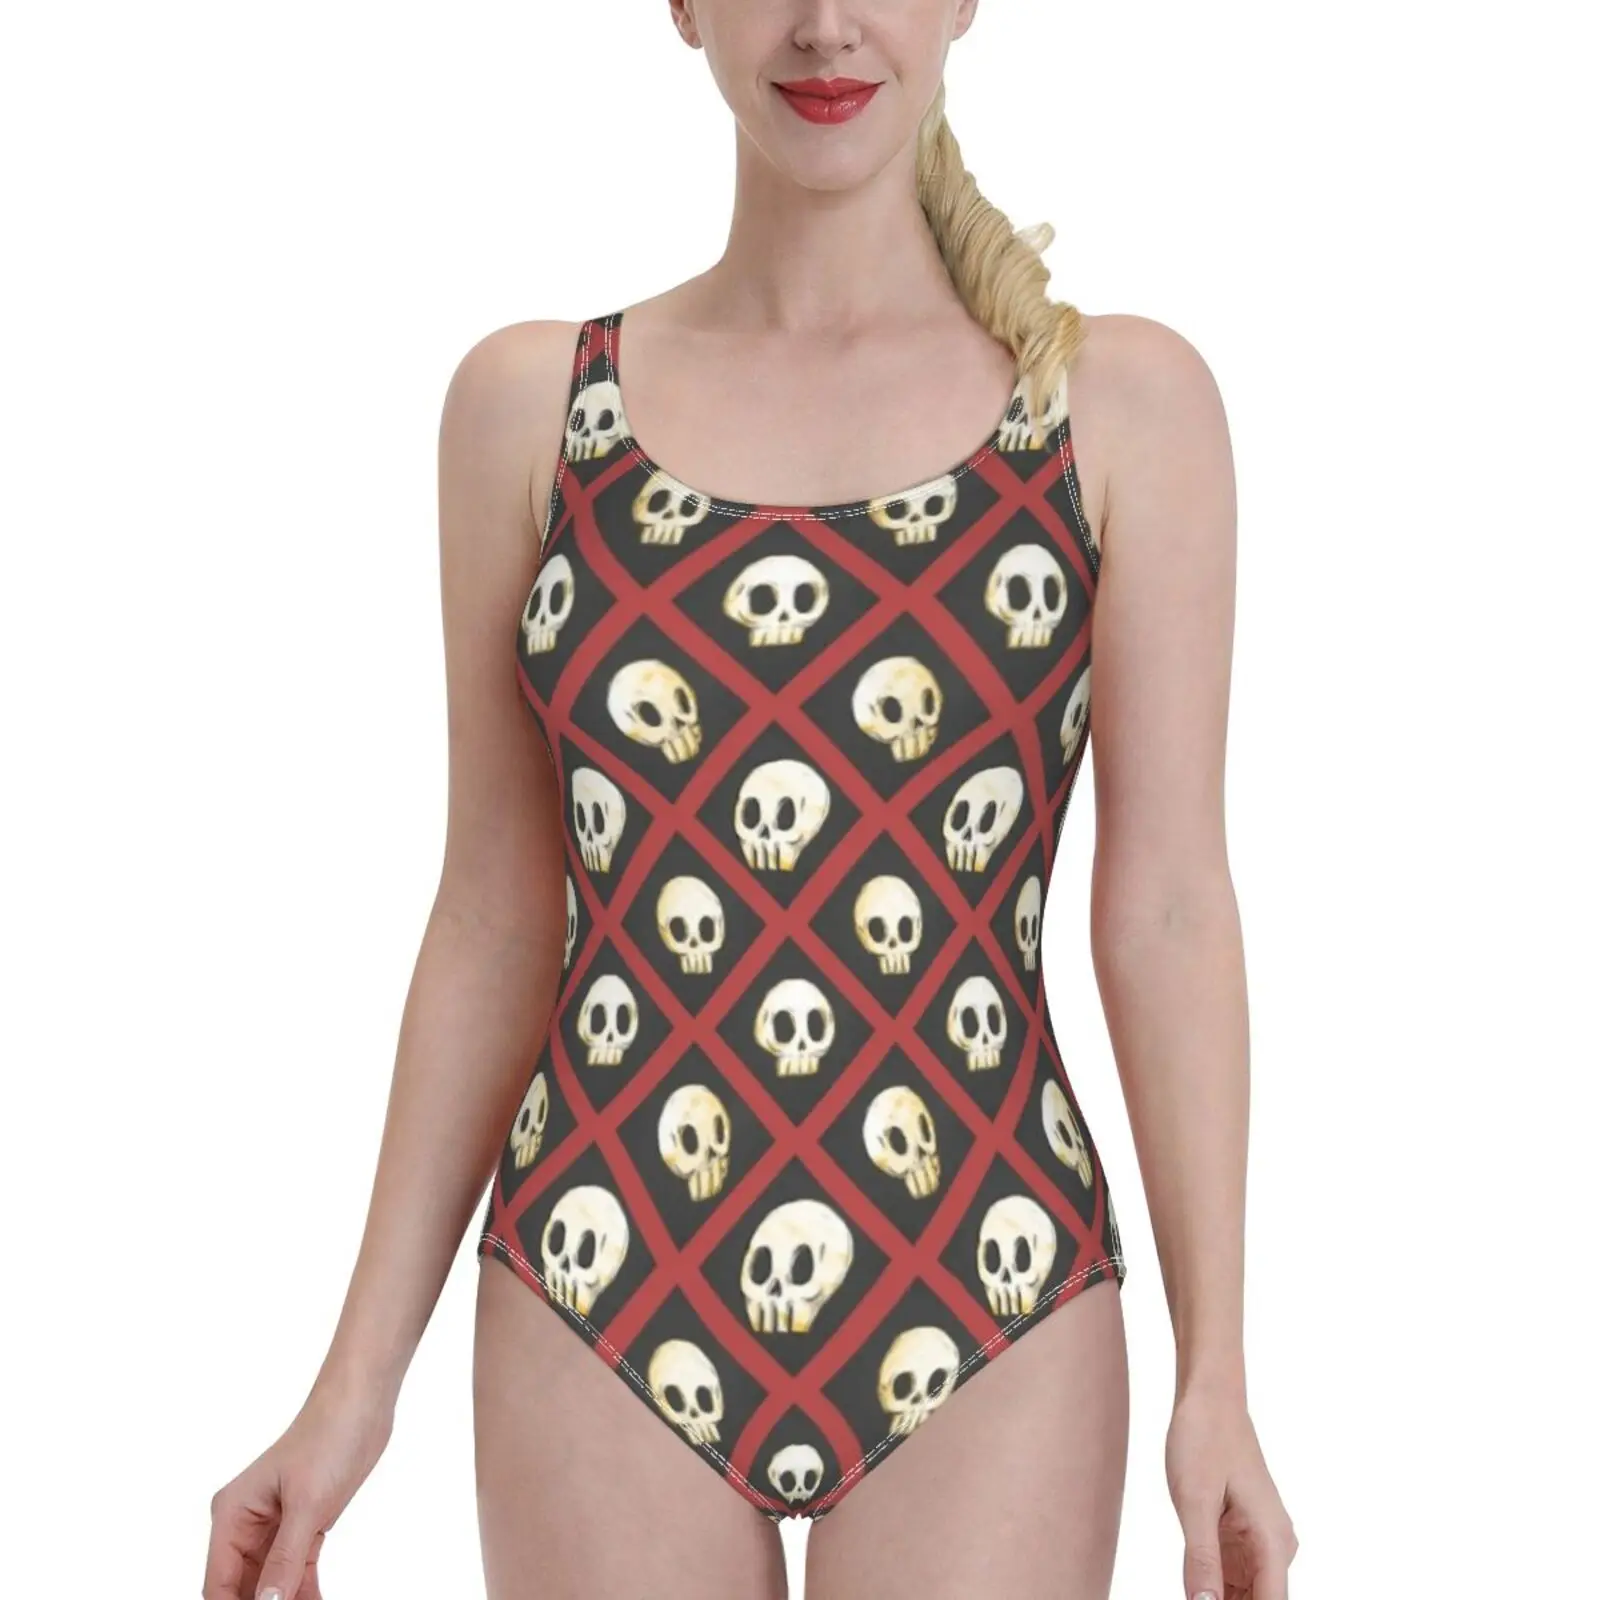 Tiling Skulls 2 / 4-Red One Piece Swimwear One Shoulder Ruffle Swimsuit Women Backless Bathing Suit Skull Spooky Emo Goth images - 6